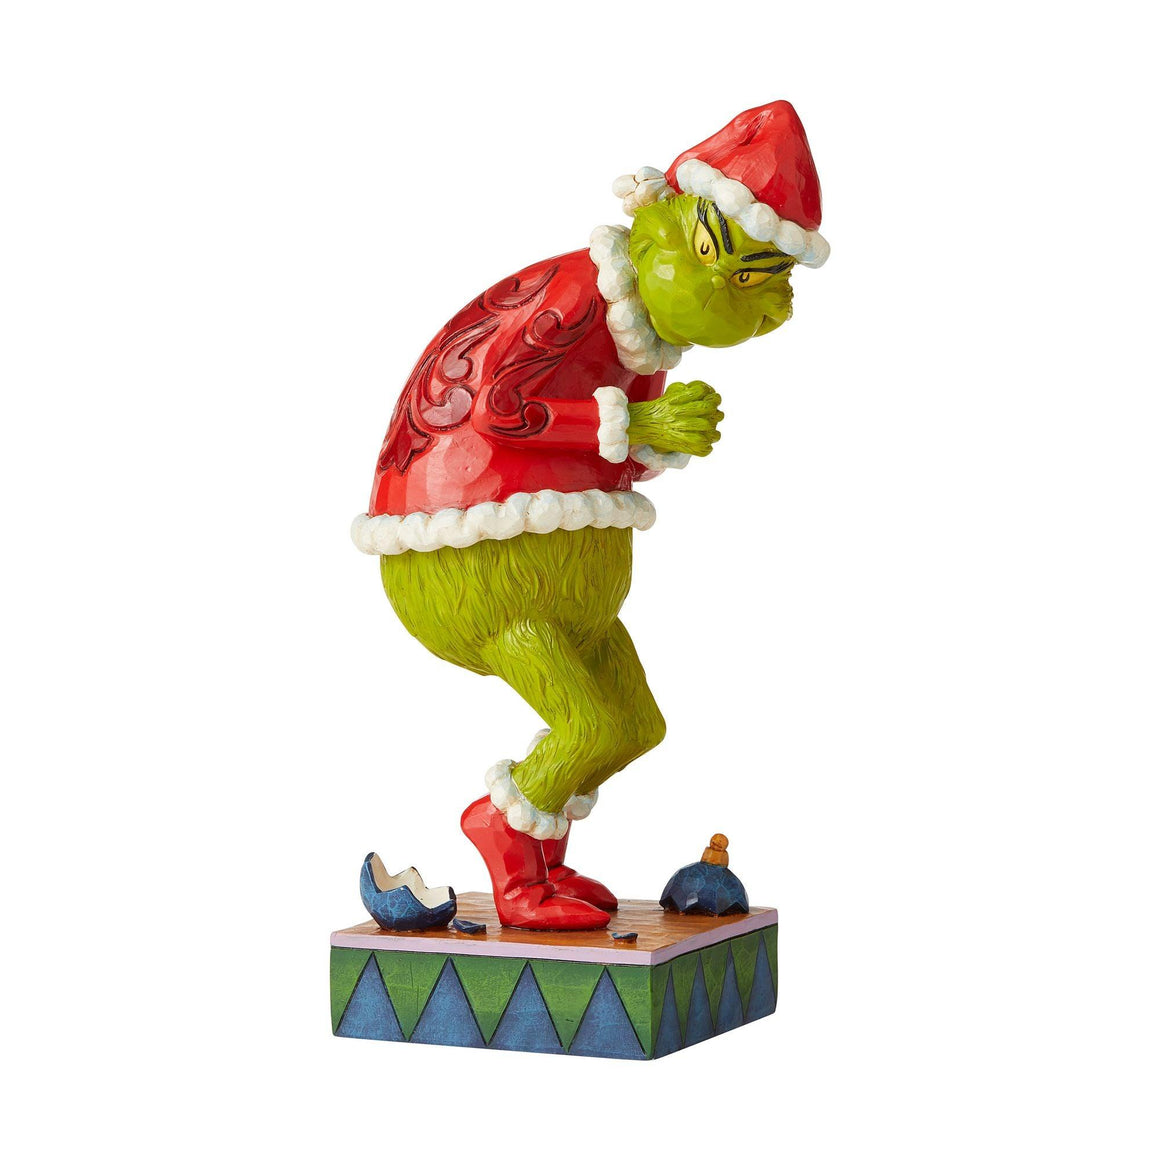 Sneaky Grinch Figurine - The Grinch by Jim Shore